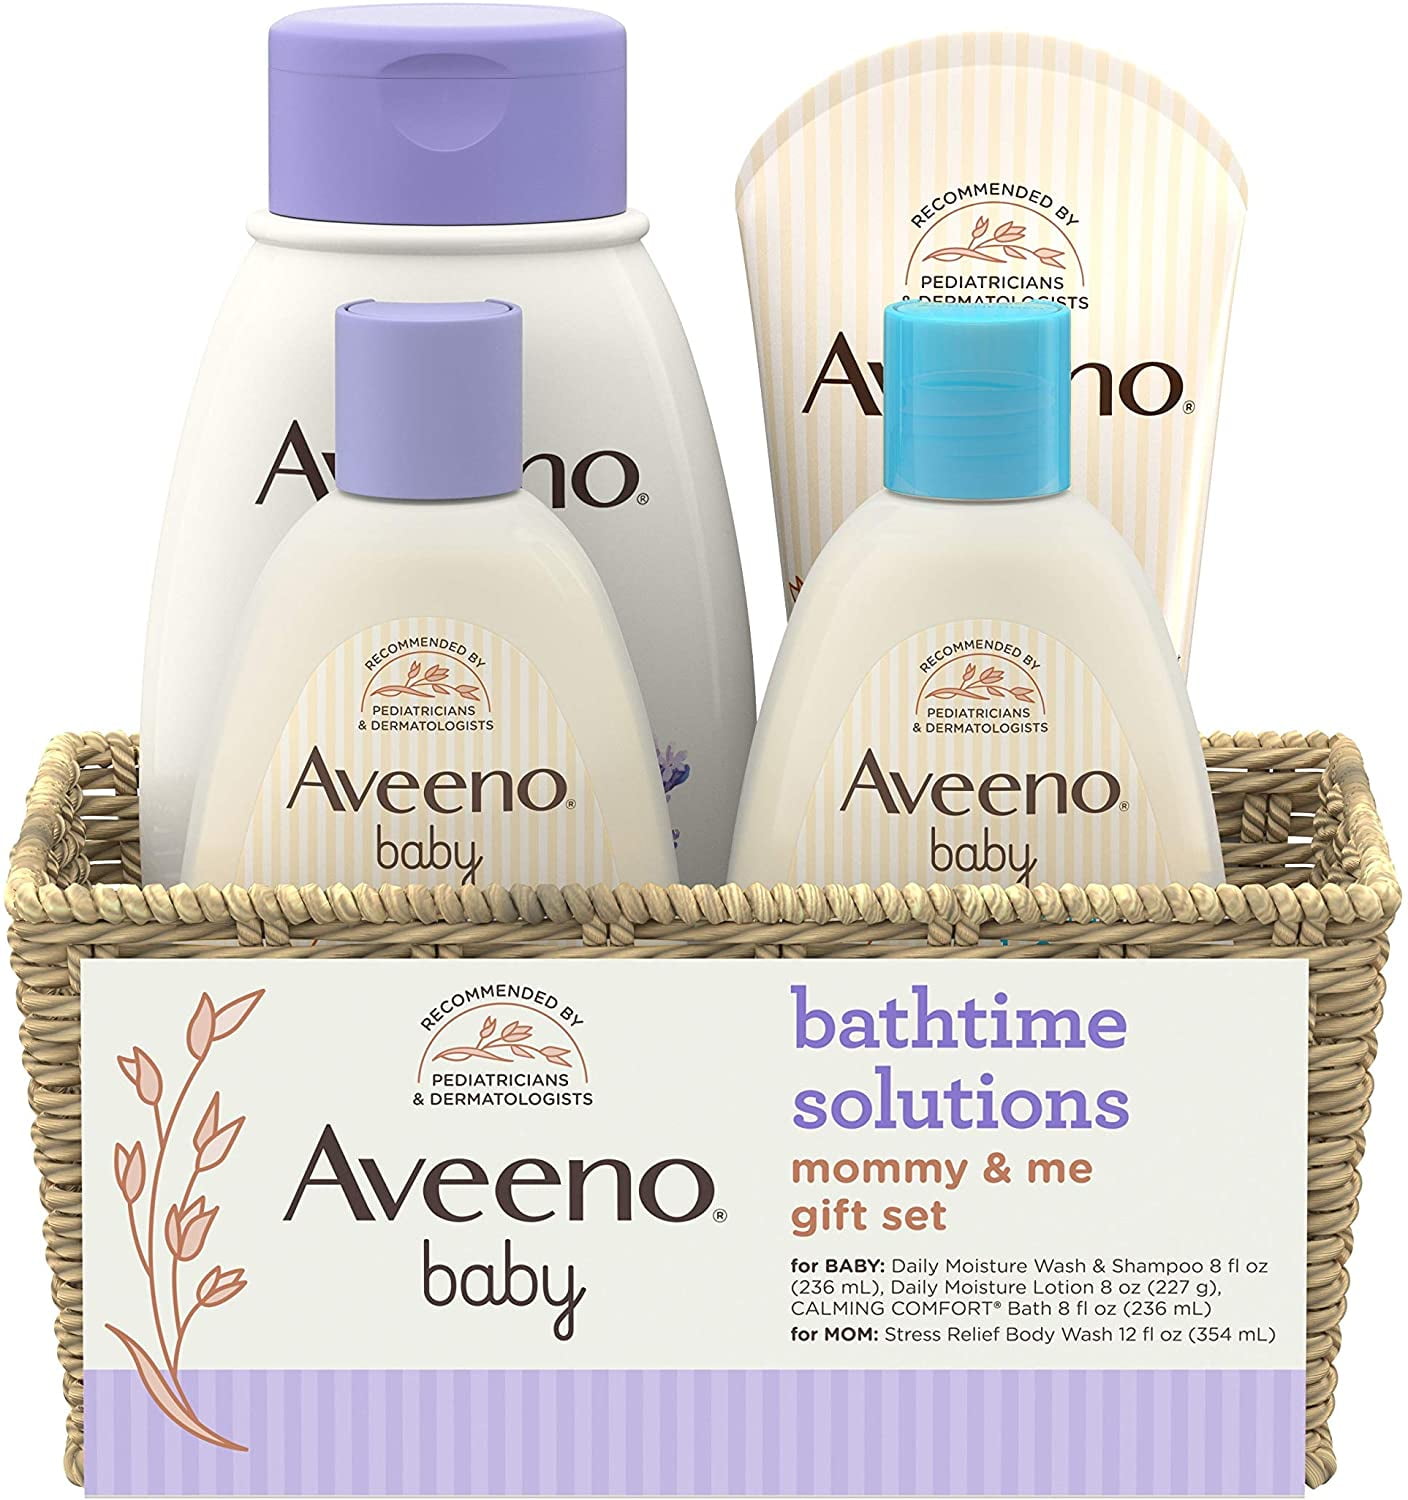 Aveeno Baby Mommy & Me Daily Bathtime Gift Set including